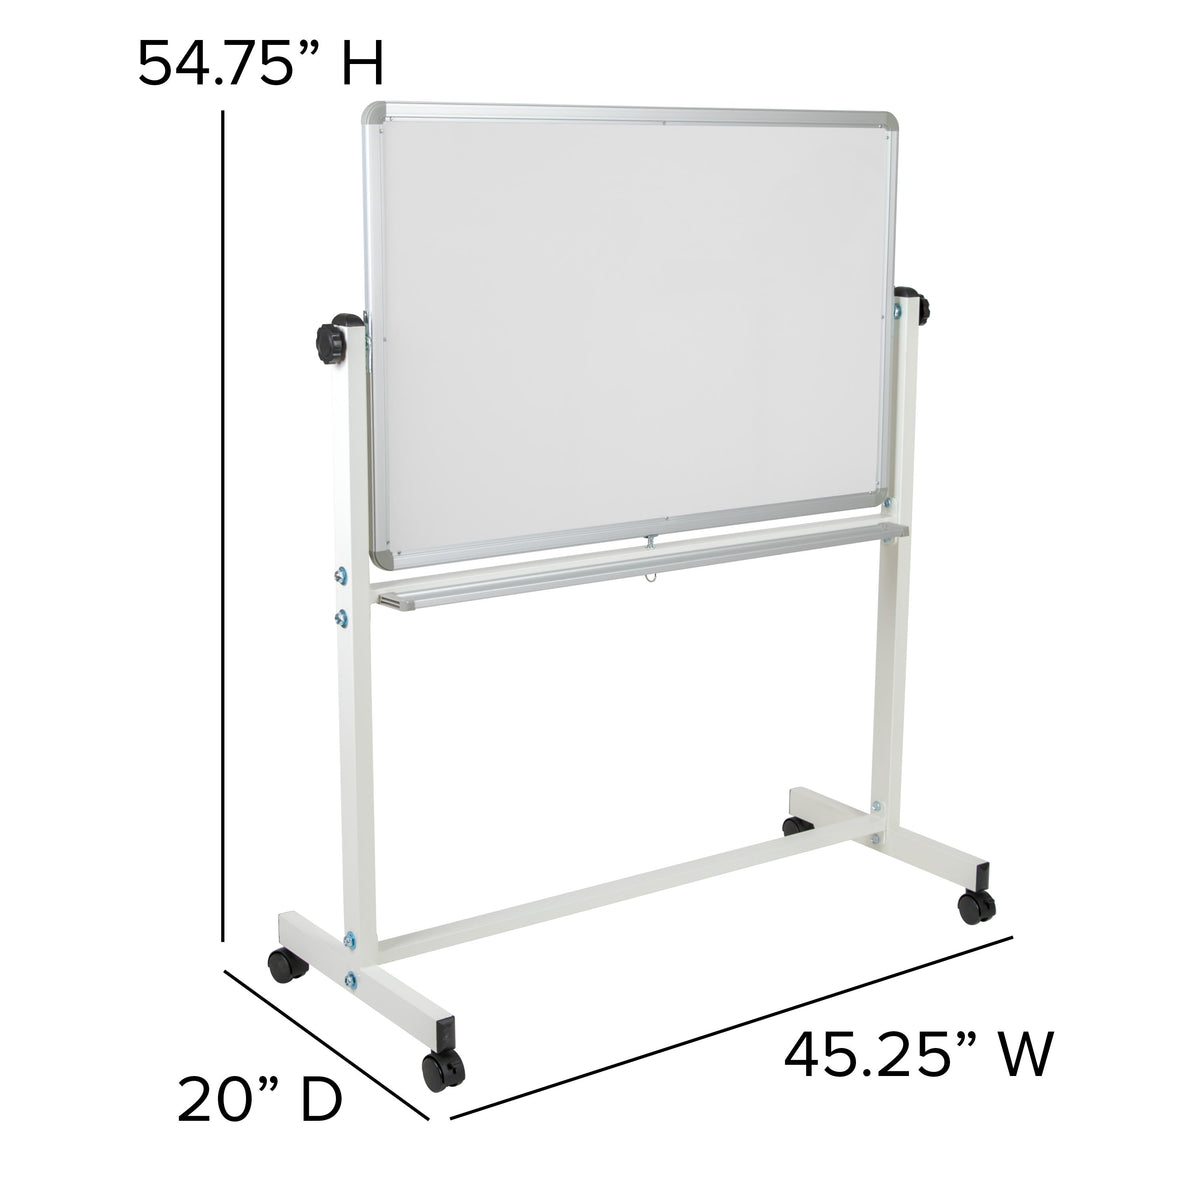 45.25"W x 54.75"H |#| 45.25"W x 54.75"H Double-Sided Mobile White Board with Shelf - Flip Over Board